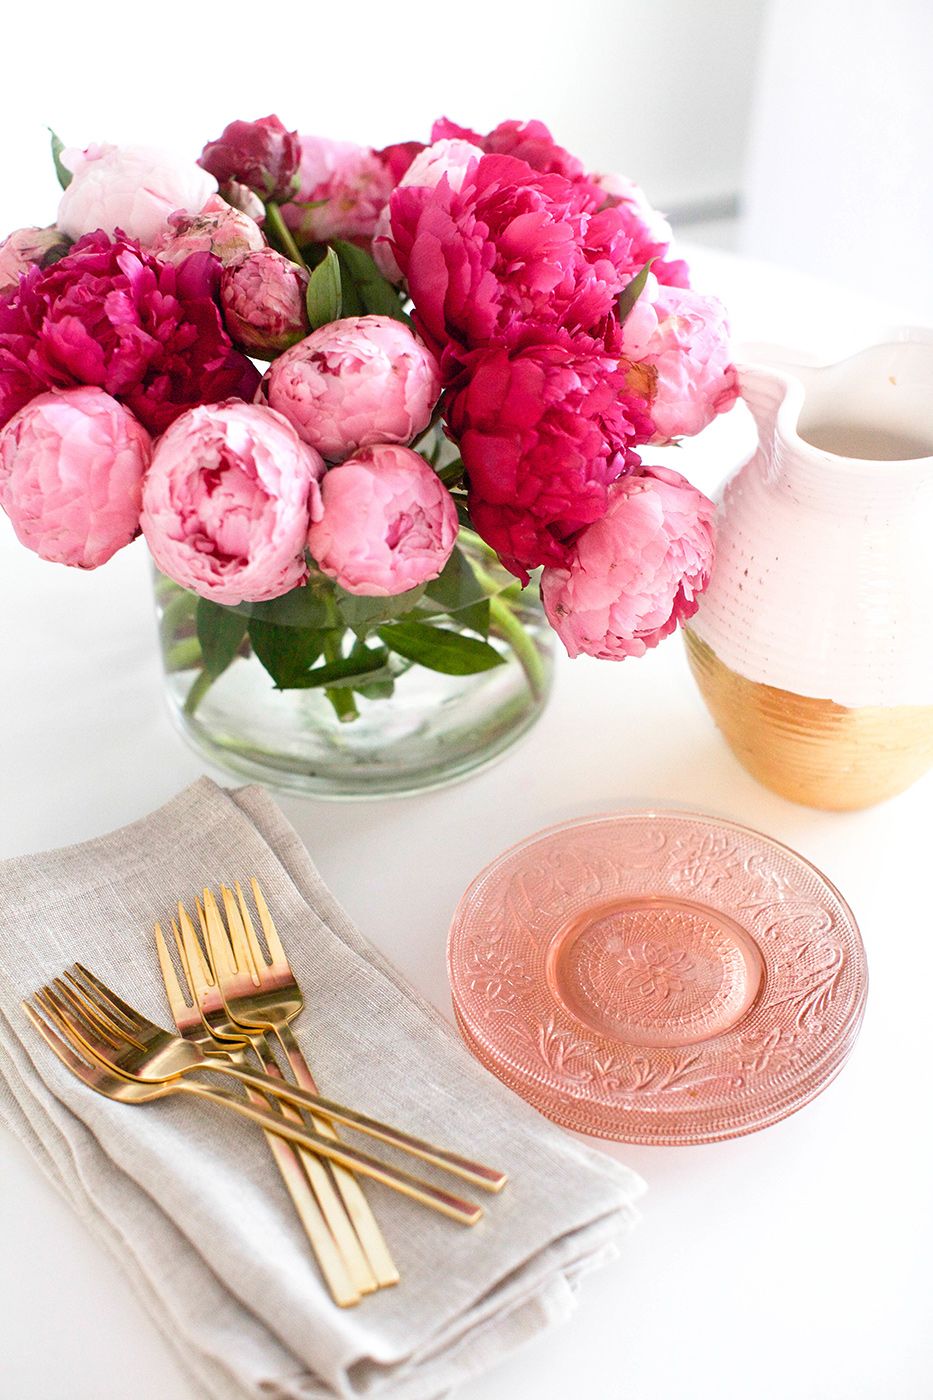 5 Incredible Flower Arrangements For a Last-Minute Dining Room Decor 2